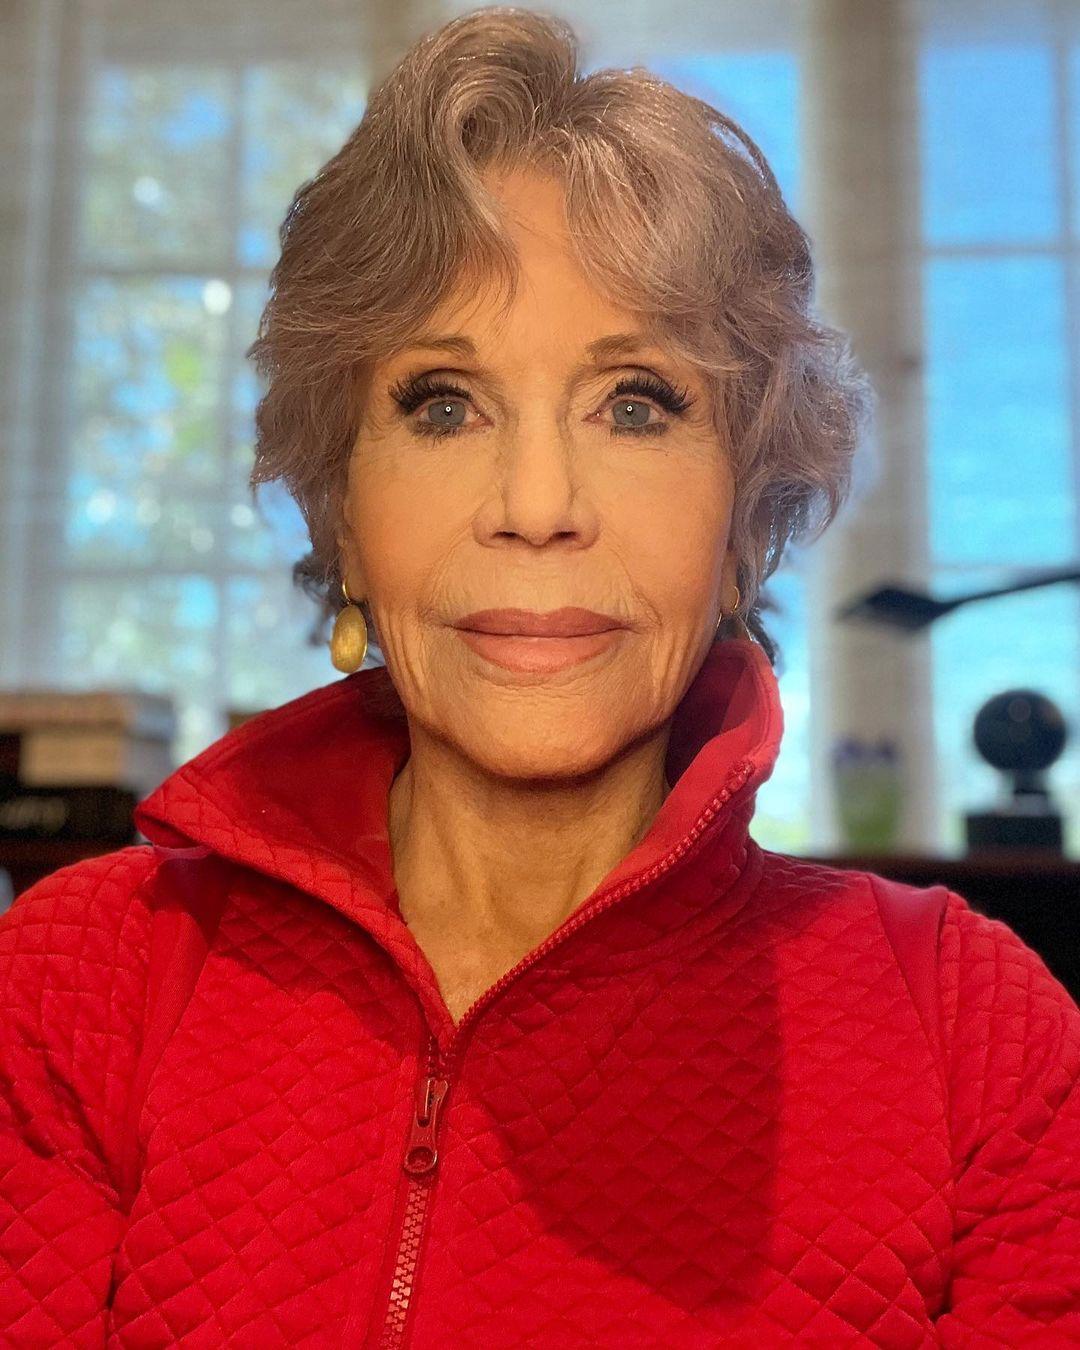 Jane Fonda's post on her Instagram page to announce her cancer diagnosis